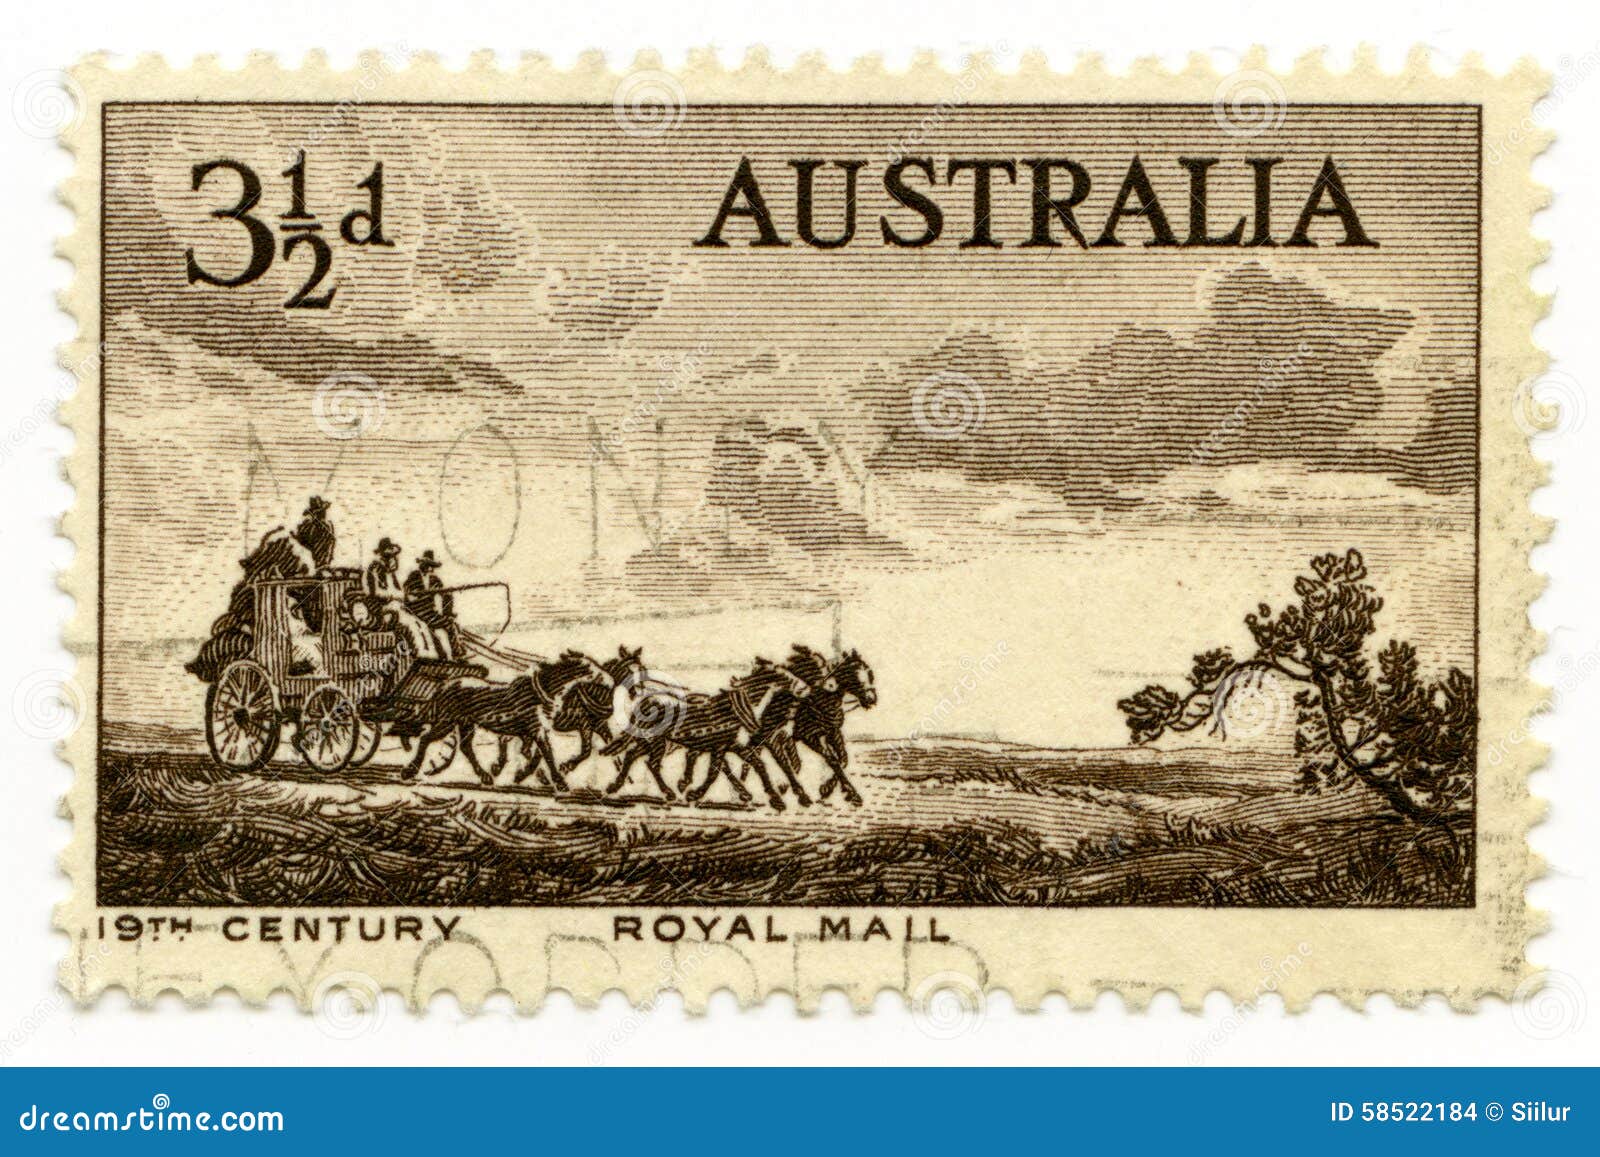 Australia Cancelled Stamp 1955 Royal Mail Editorial Stock Image - Image of  1955, communications: 58522184